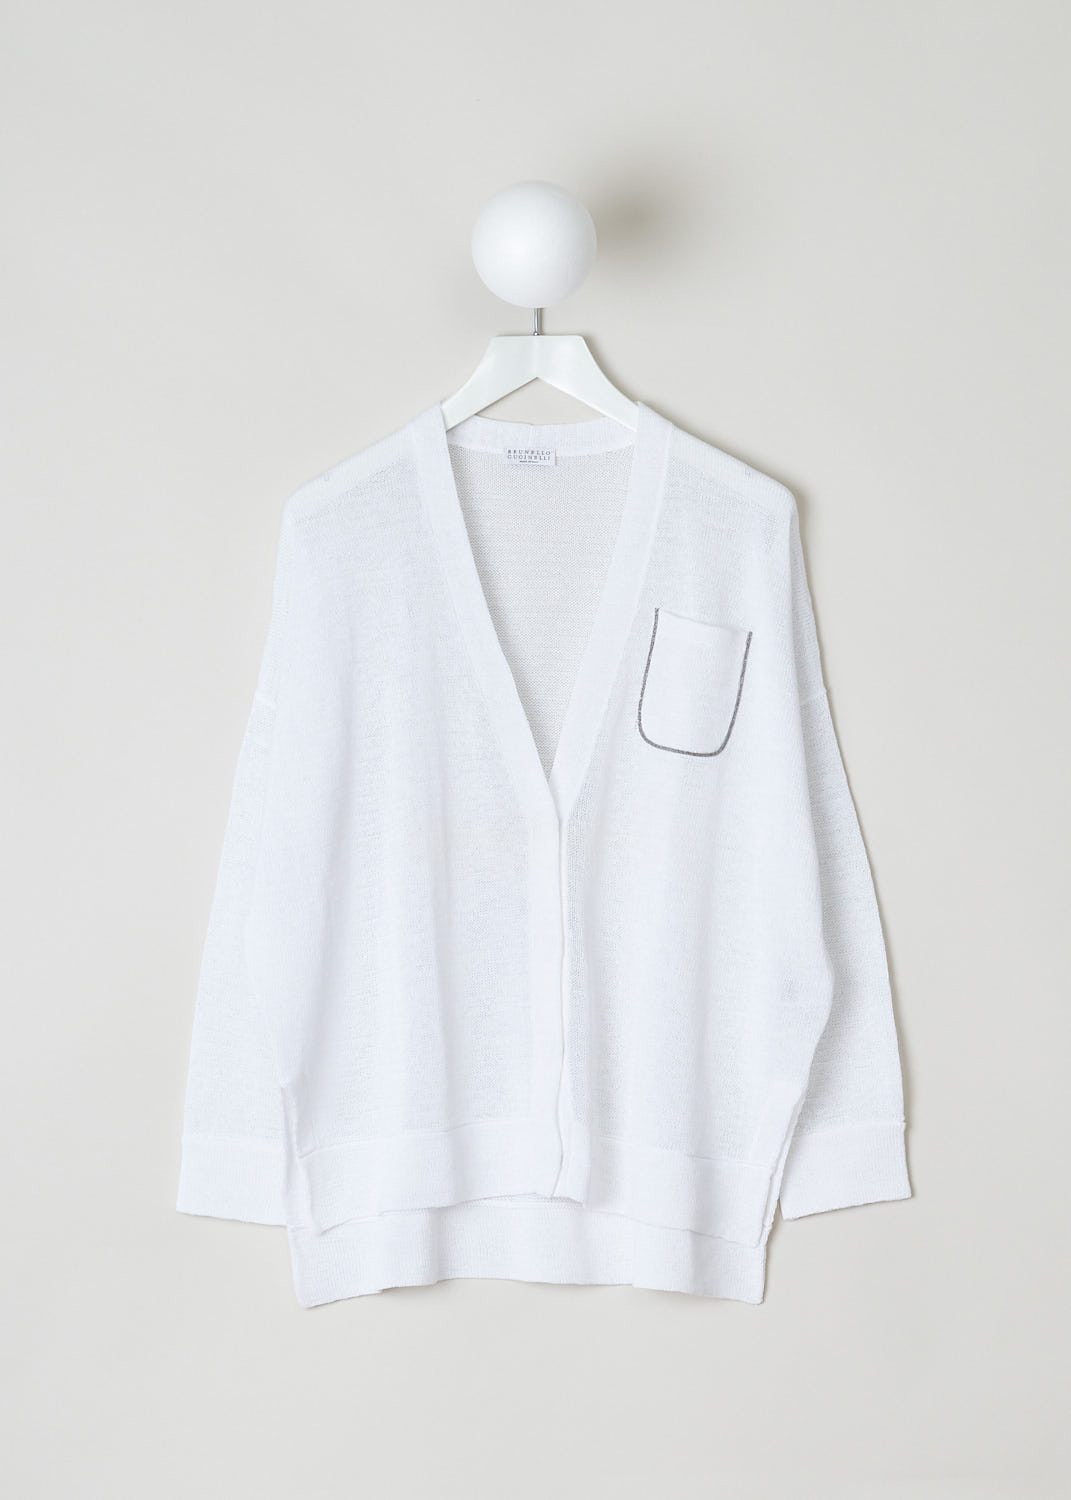 Brunello Cucinelli, Oversized white cardigan, M78733606_C159, white, front, White oversized model featuring dropped shoulders and 3/4 sleeve length. Below the v-shaped neckline sits the fastening option in the form of concealed press studs. The overall fit is asymmetric, meaning the back is left longer than front. Further decorating the front are two slip-in pockets and a patch pocket on chest-height. 